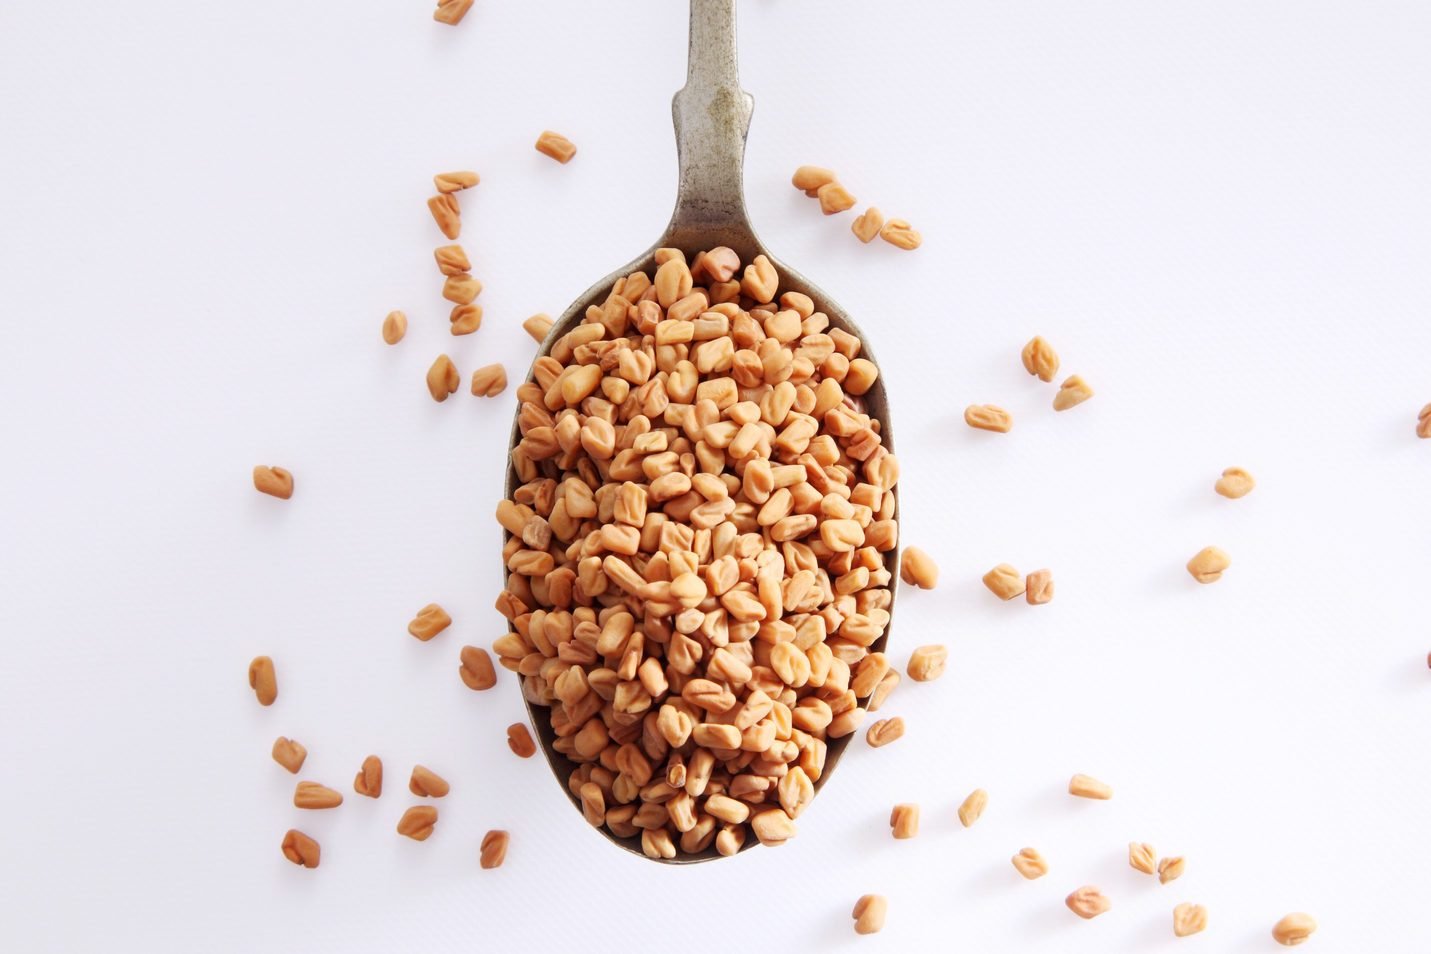 What Are the Health Benefits of Fenugreek Seeds?